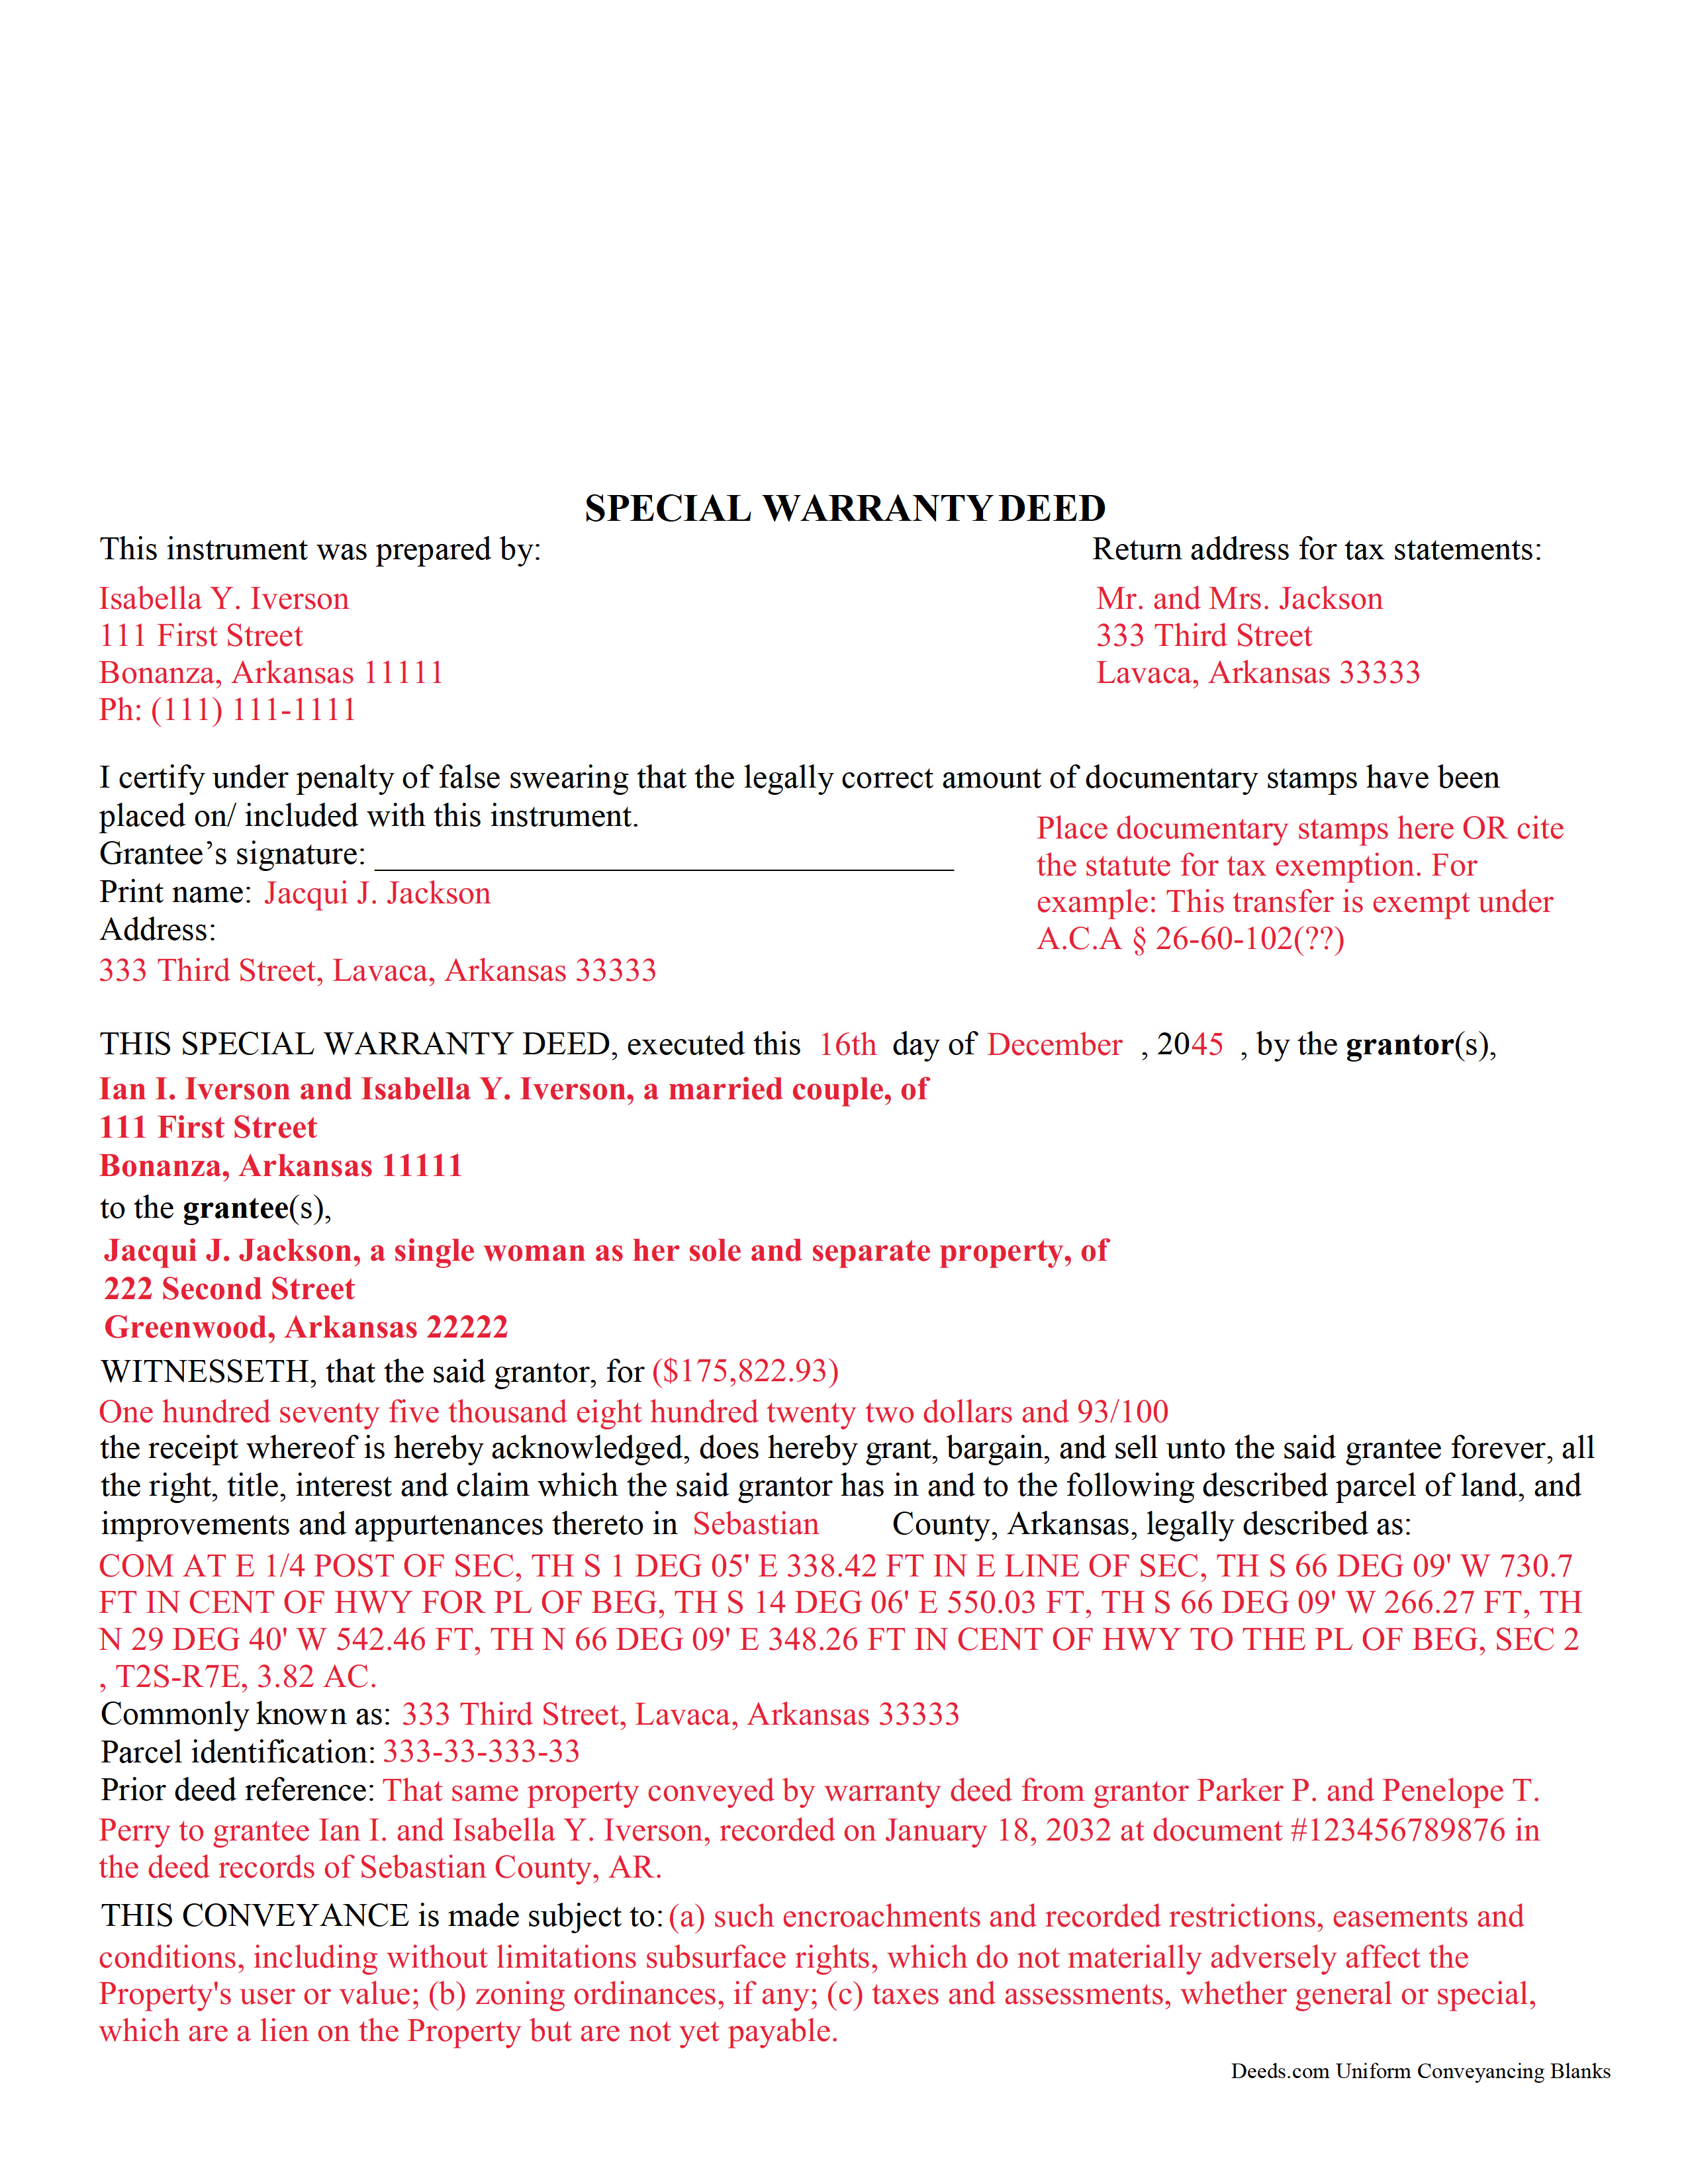 Completed Example of the Special Warranty Deed Document